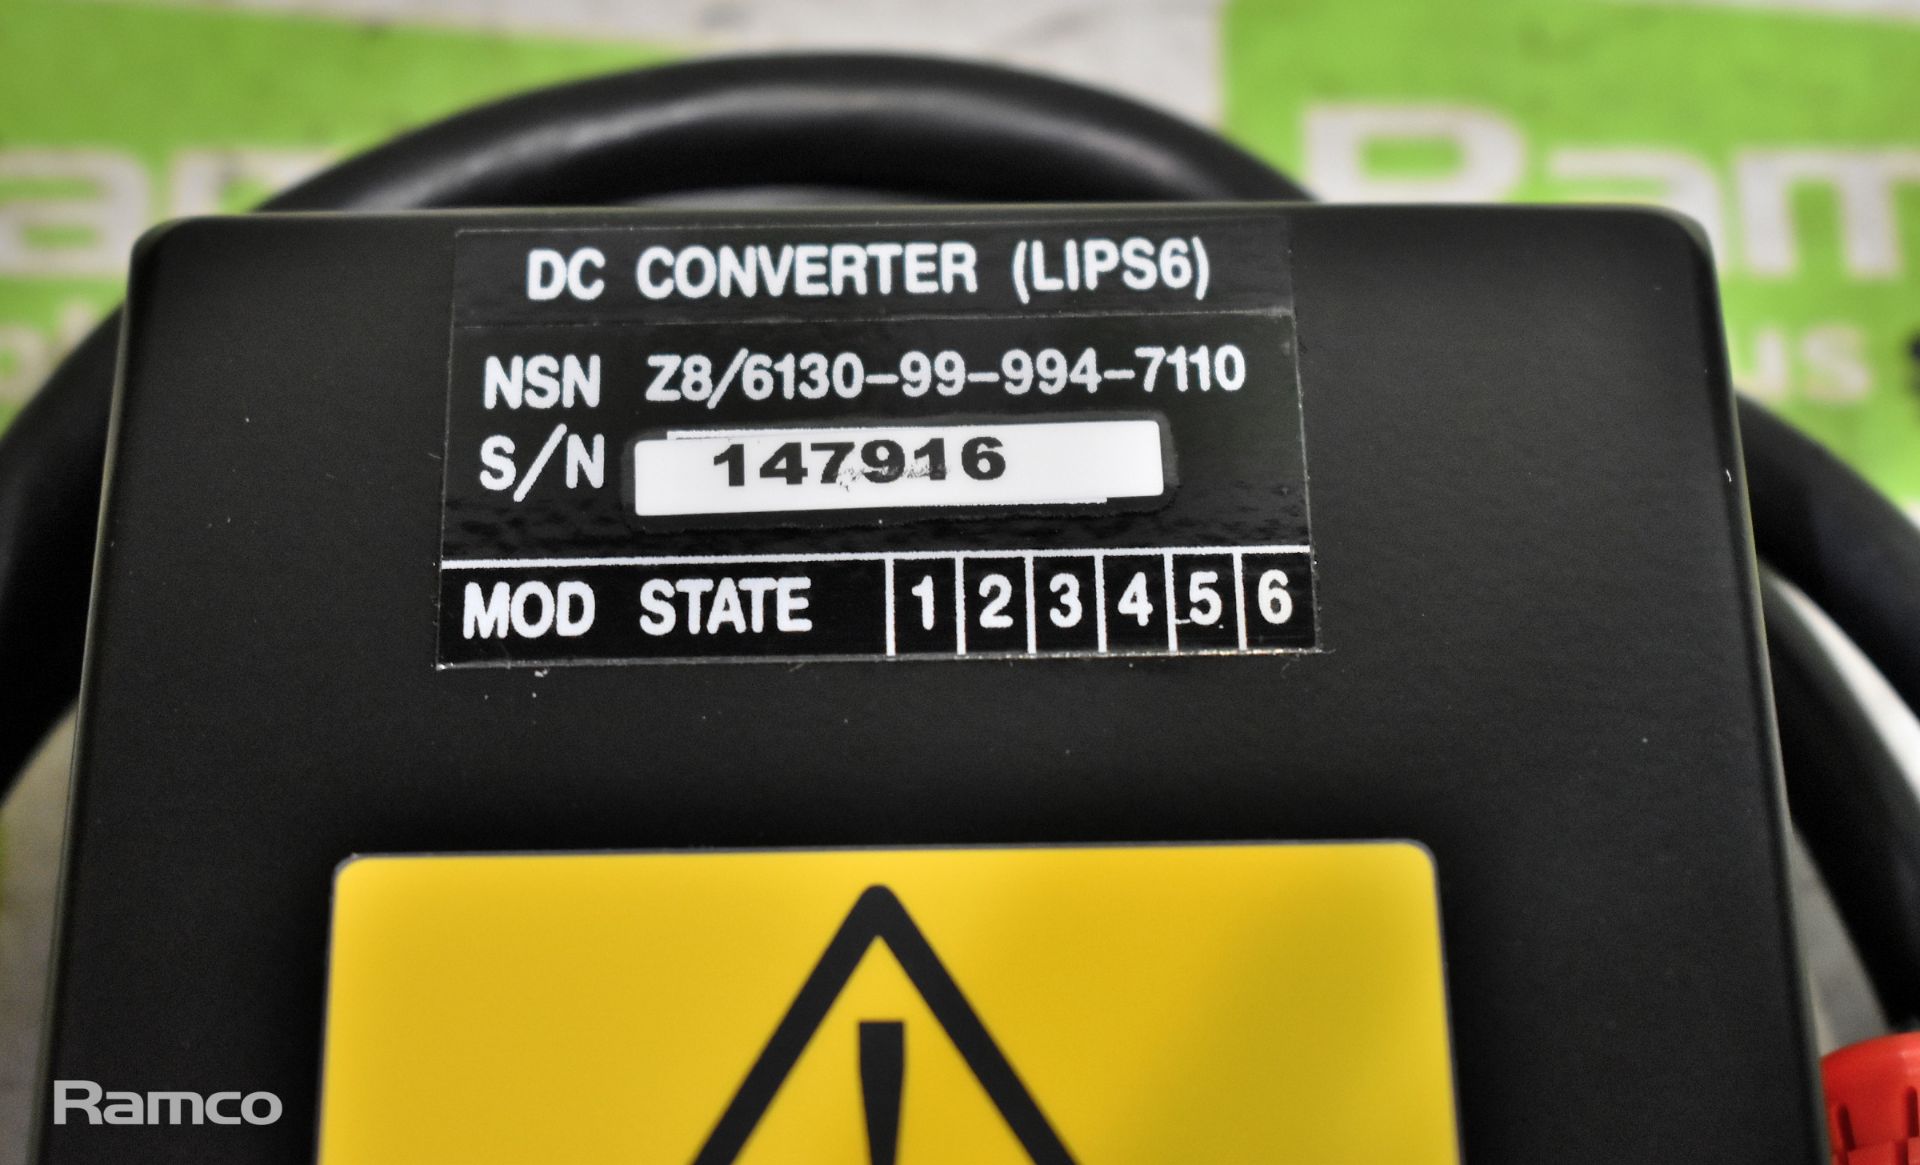 Power supply DC converter unit - power out 29.0V 4A max - Image 2 of 2